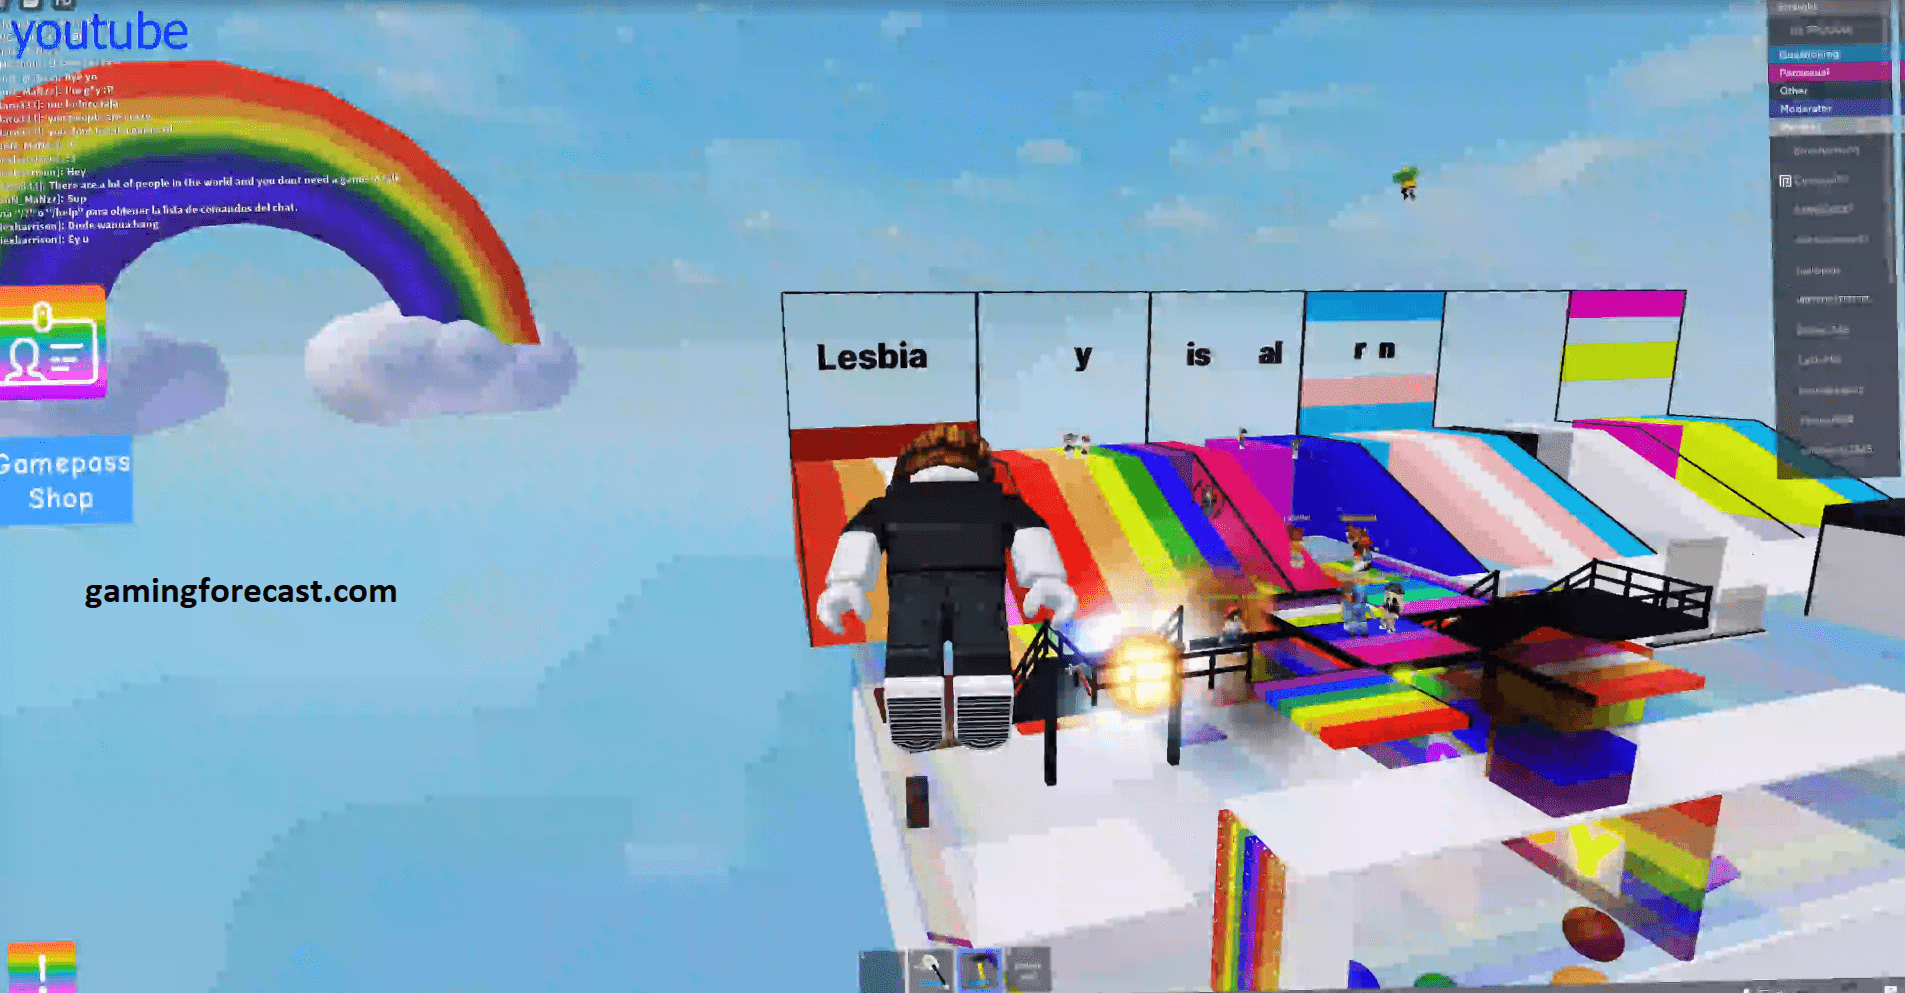 Roblox Hack Download Pc Destroy Lobby Fly Aimbot Scripts 2021 Gaming Forecast Download Free Online Game Hacks - roblox hack menu free